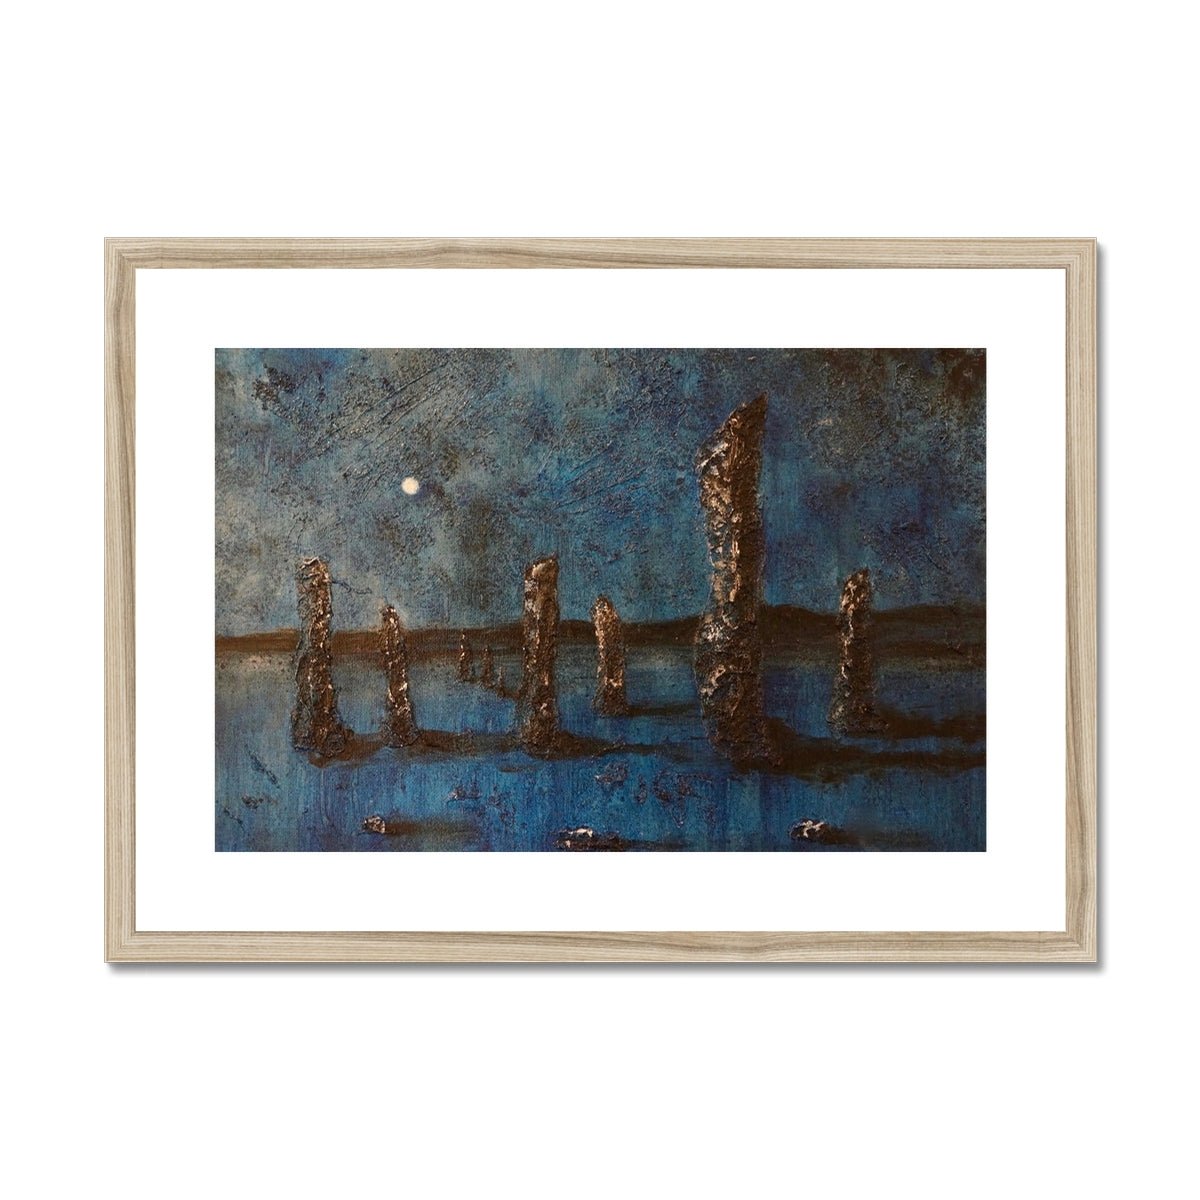 Callanish Moonlight Lewis Painting | Framed & Mounted Prints From Scotland-Framed & Mounted Prints-Hebridean Islands Art Gallery-A2 Landscape-Natural Frame-Paintings, Prints, Homeware, Art Gifts From Scotland By Scottish Artist Kevin Hunter